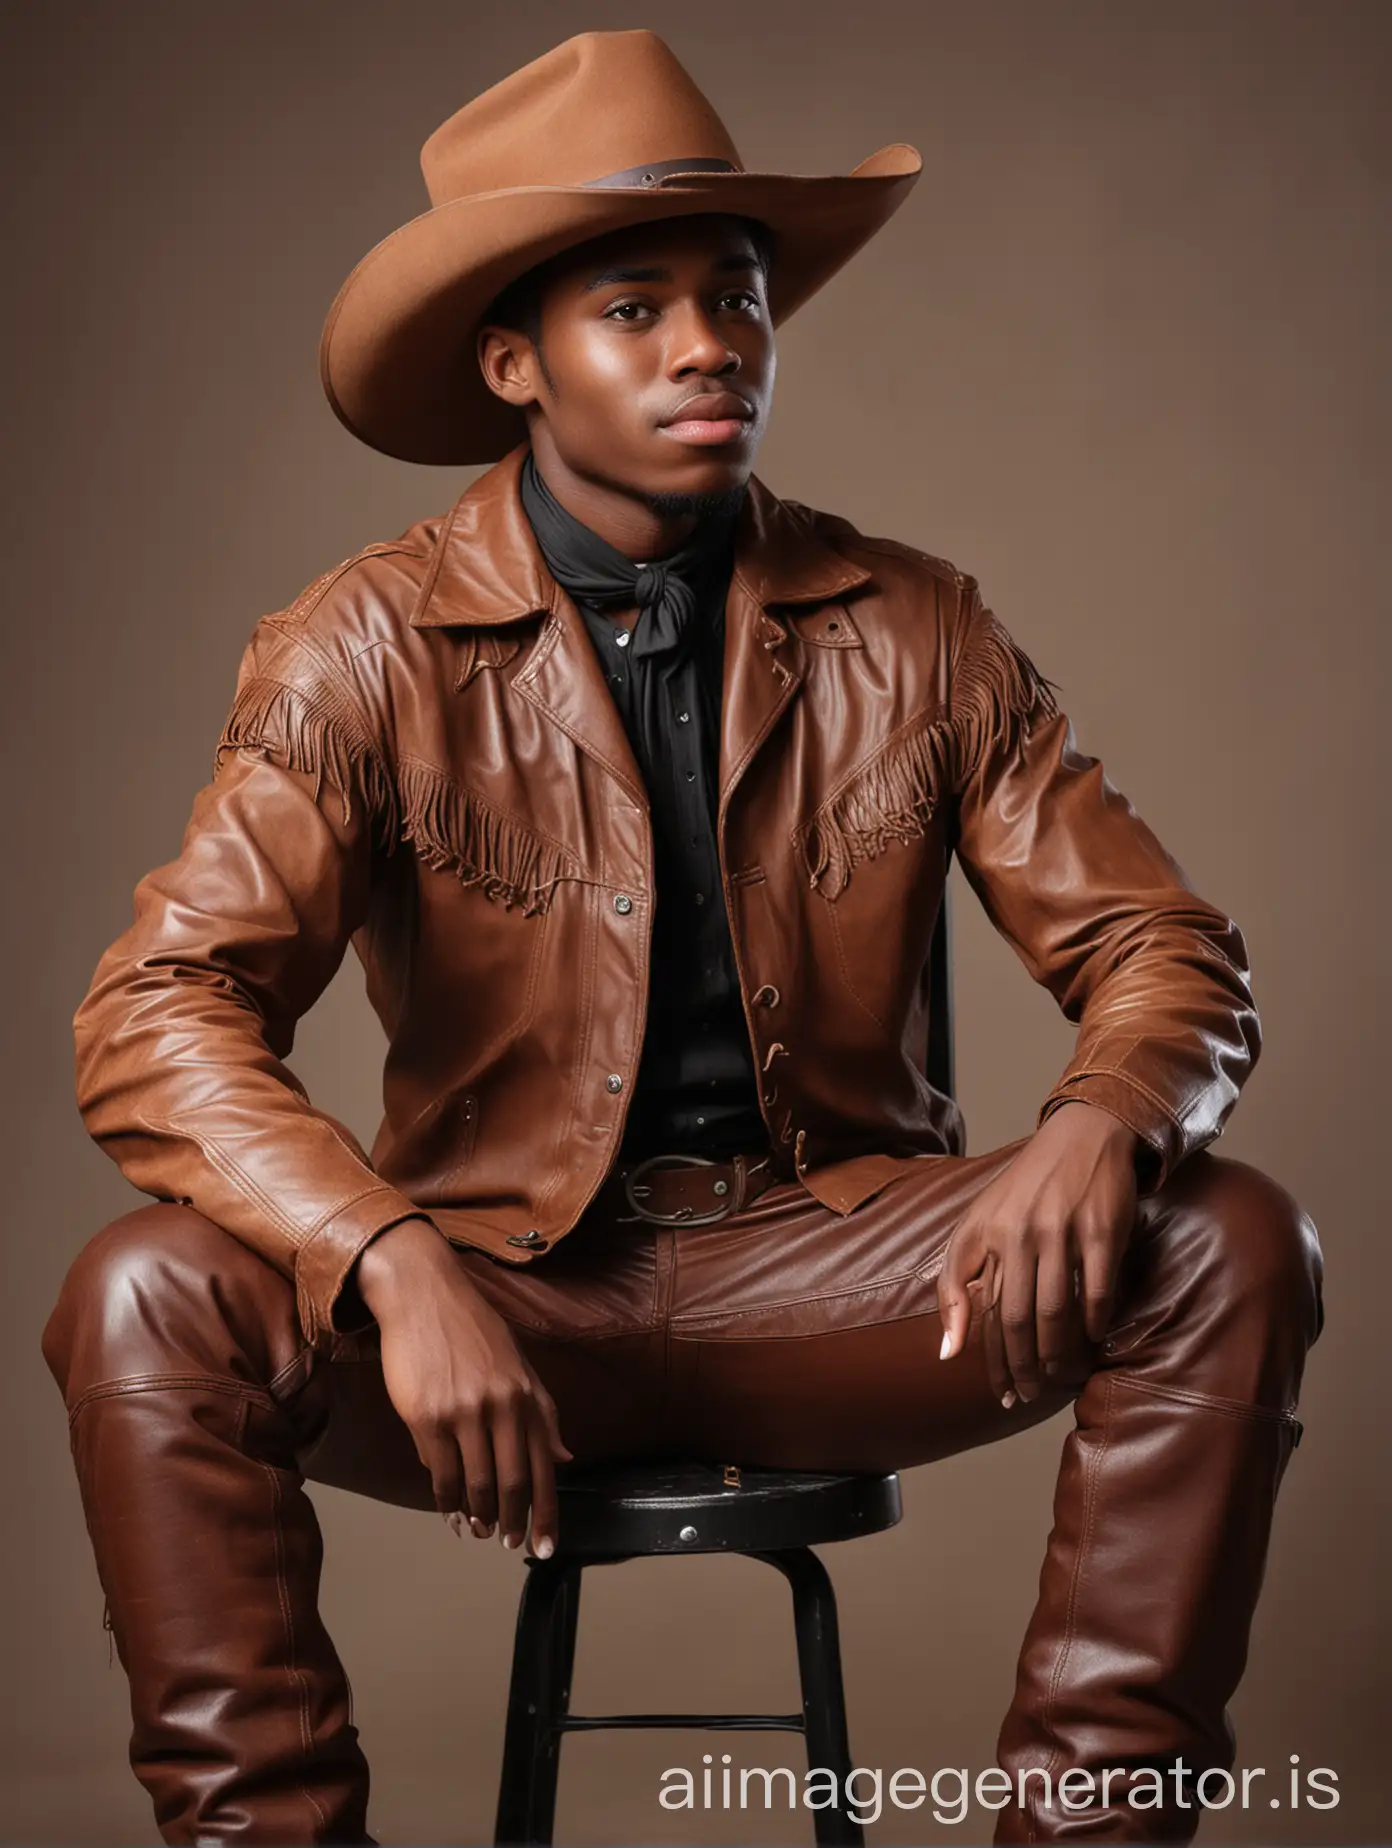 Young-Black-Cowboy-in-Rustic-Leather-Attire-Sitting